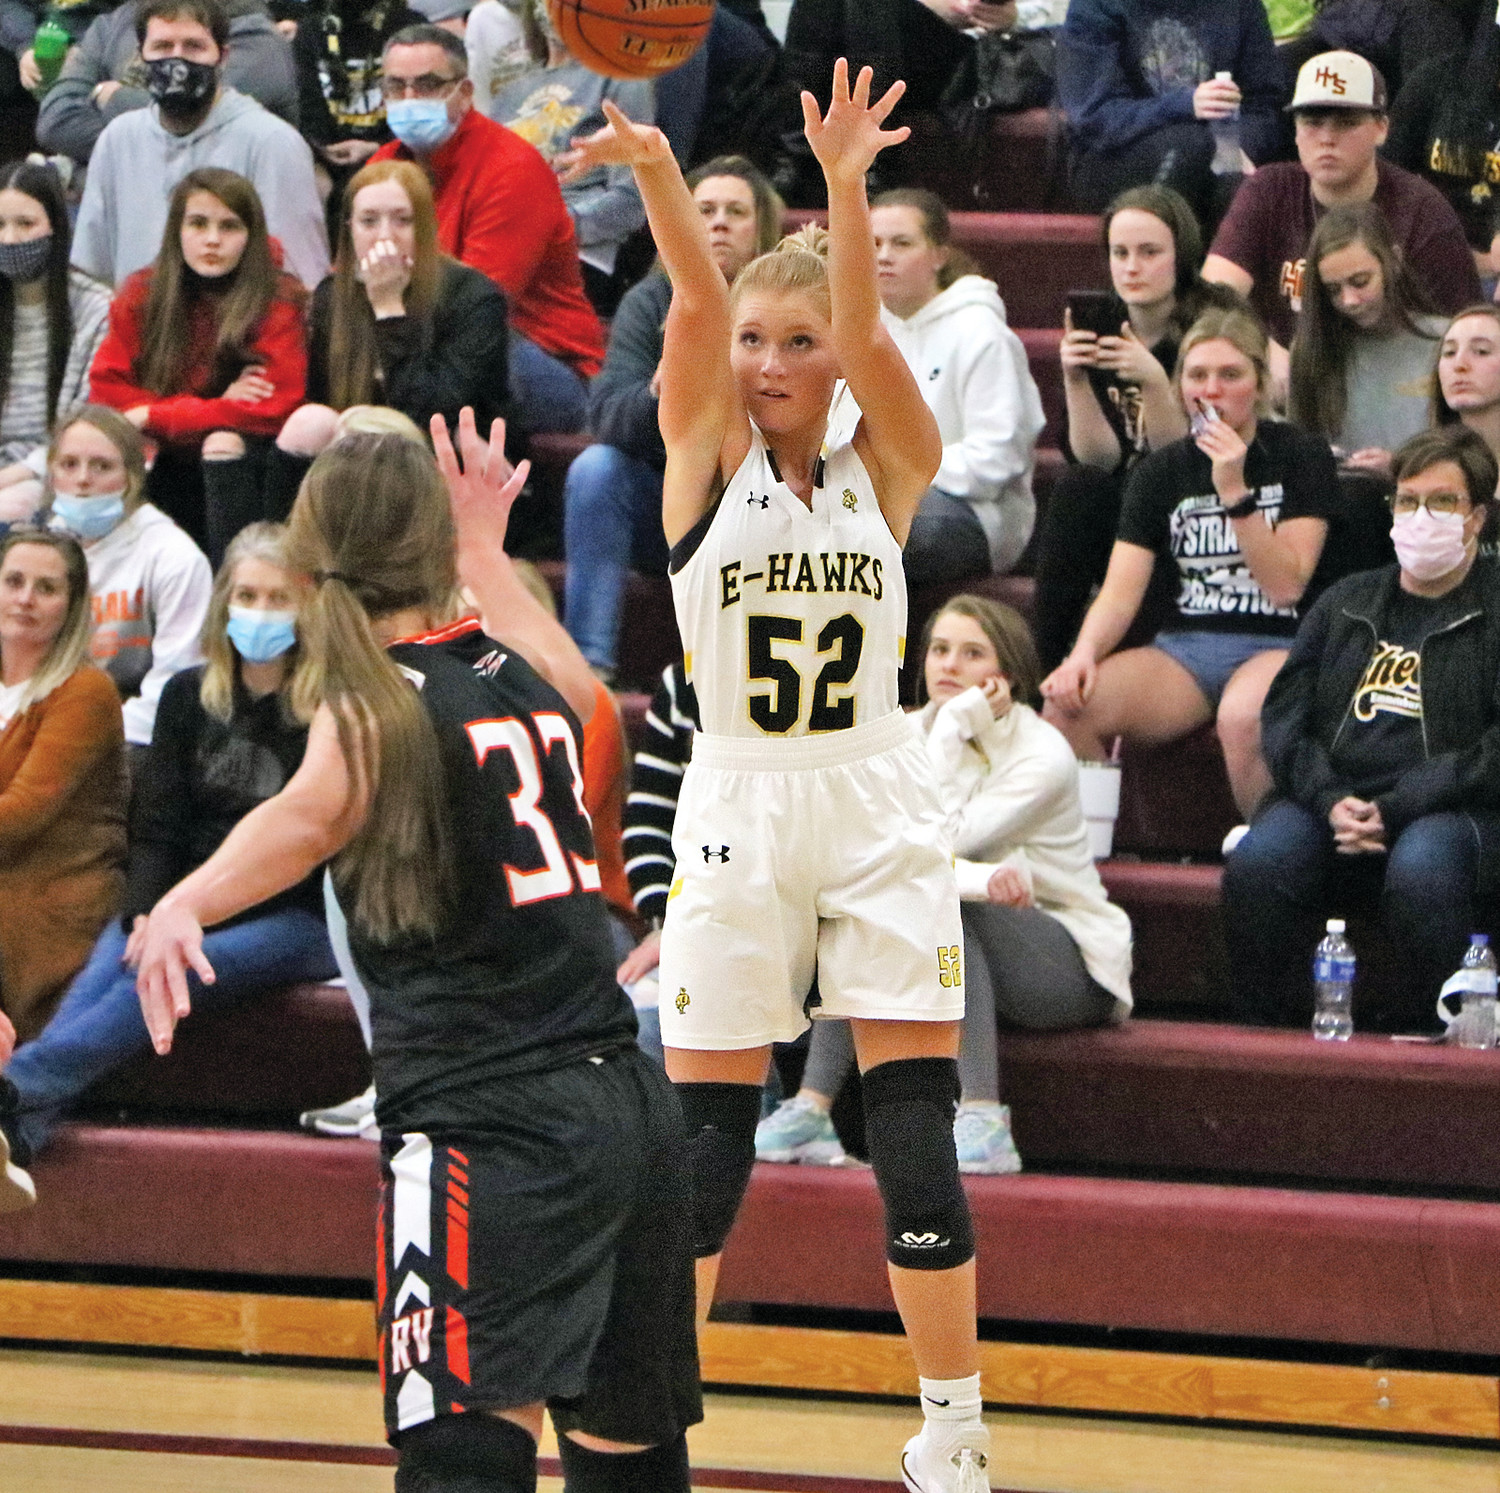 TOUGH DEFENSE -- A tough Rock Valley defense would force the Lady E-Hawks into outside shot attempts throughout the regional championship contest. Pictured, senior Taylor Steinkamp attempts a three-pointer. 
-- Joseph Schany photo